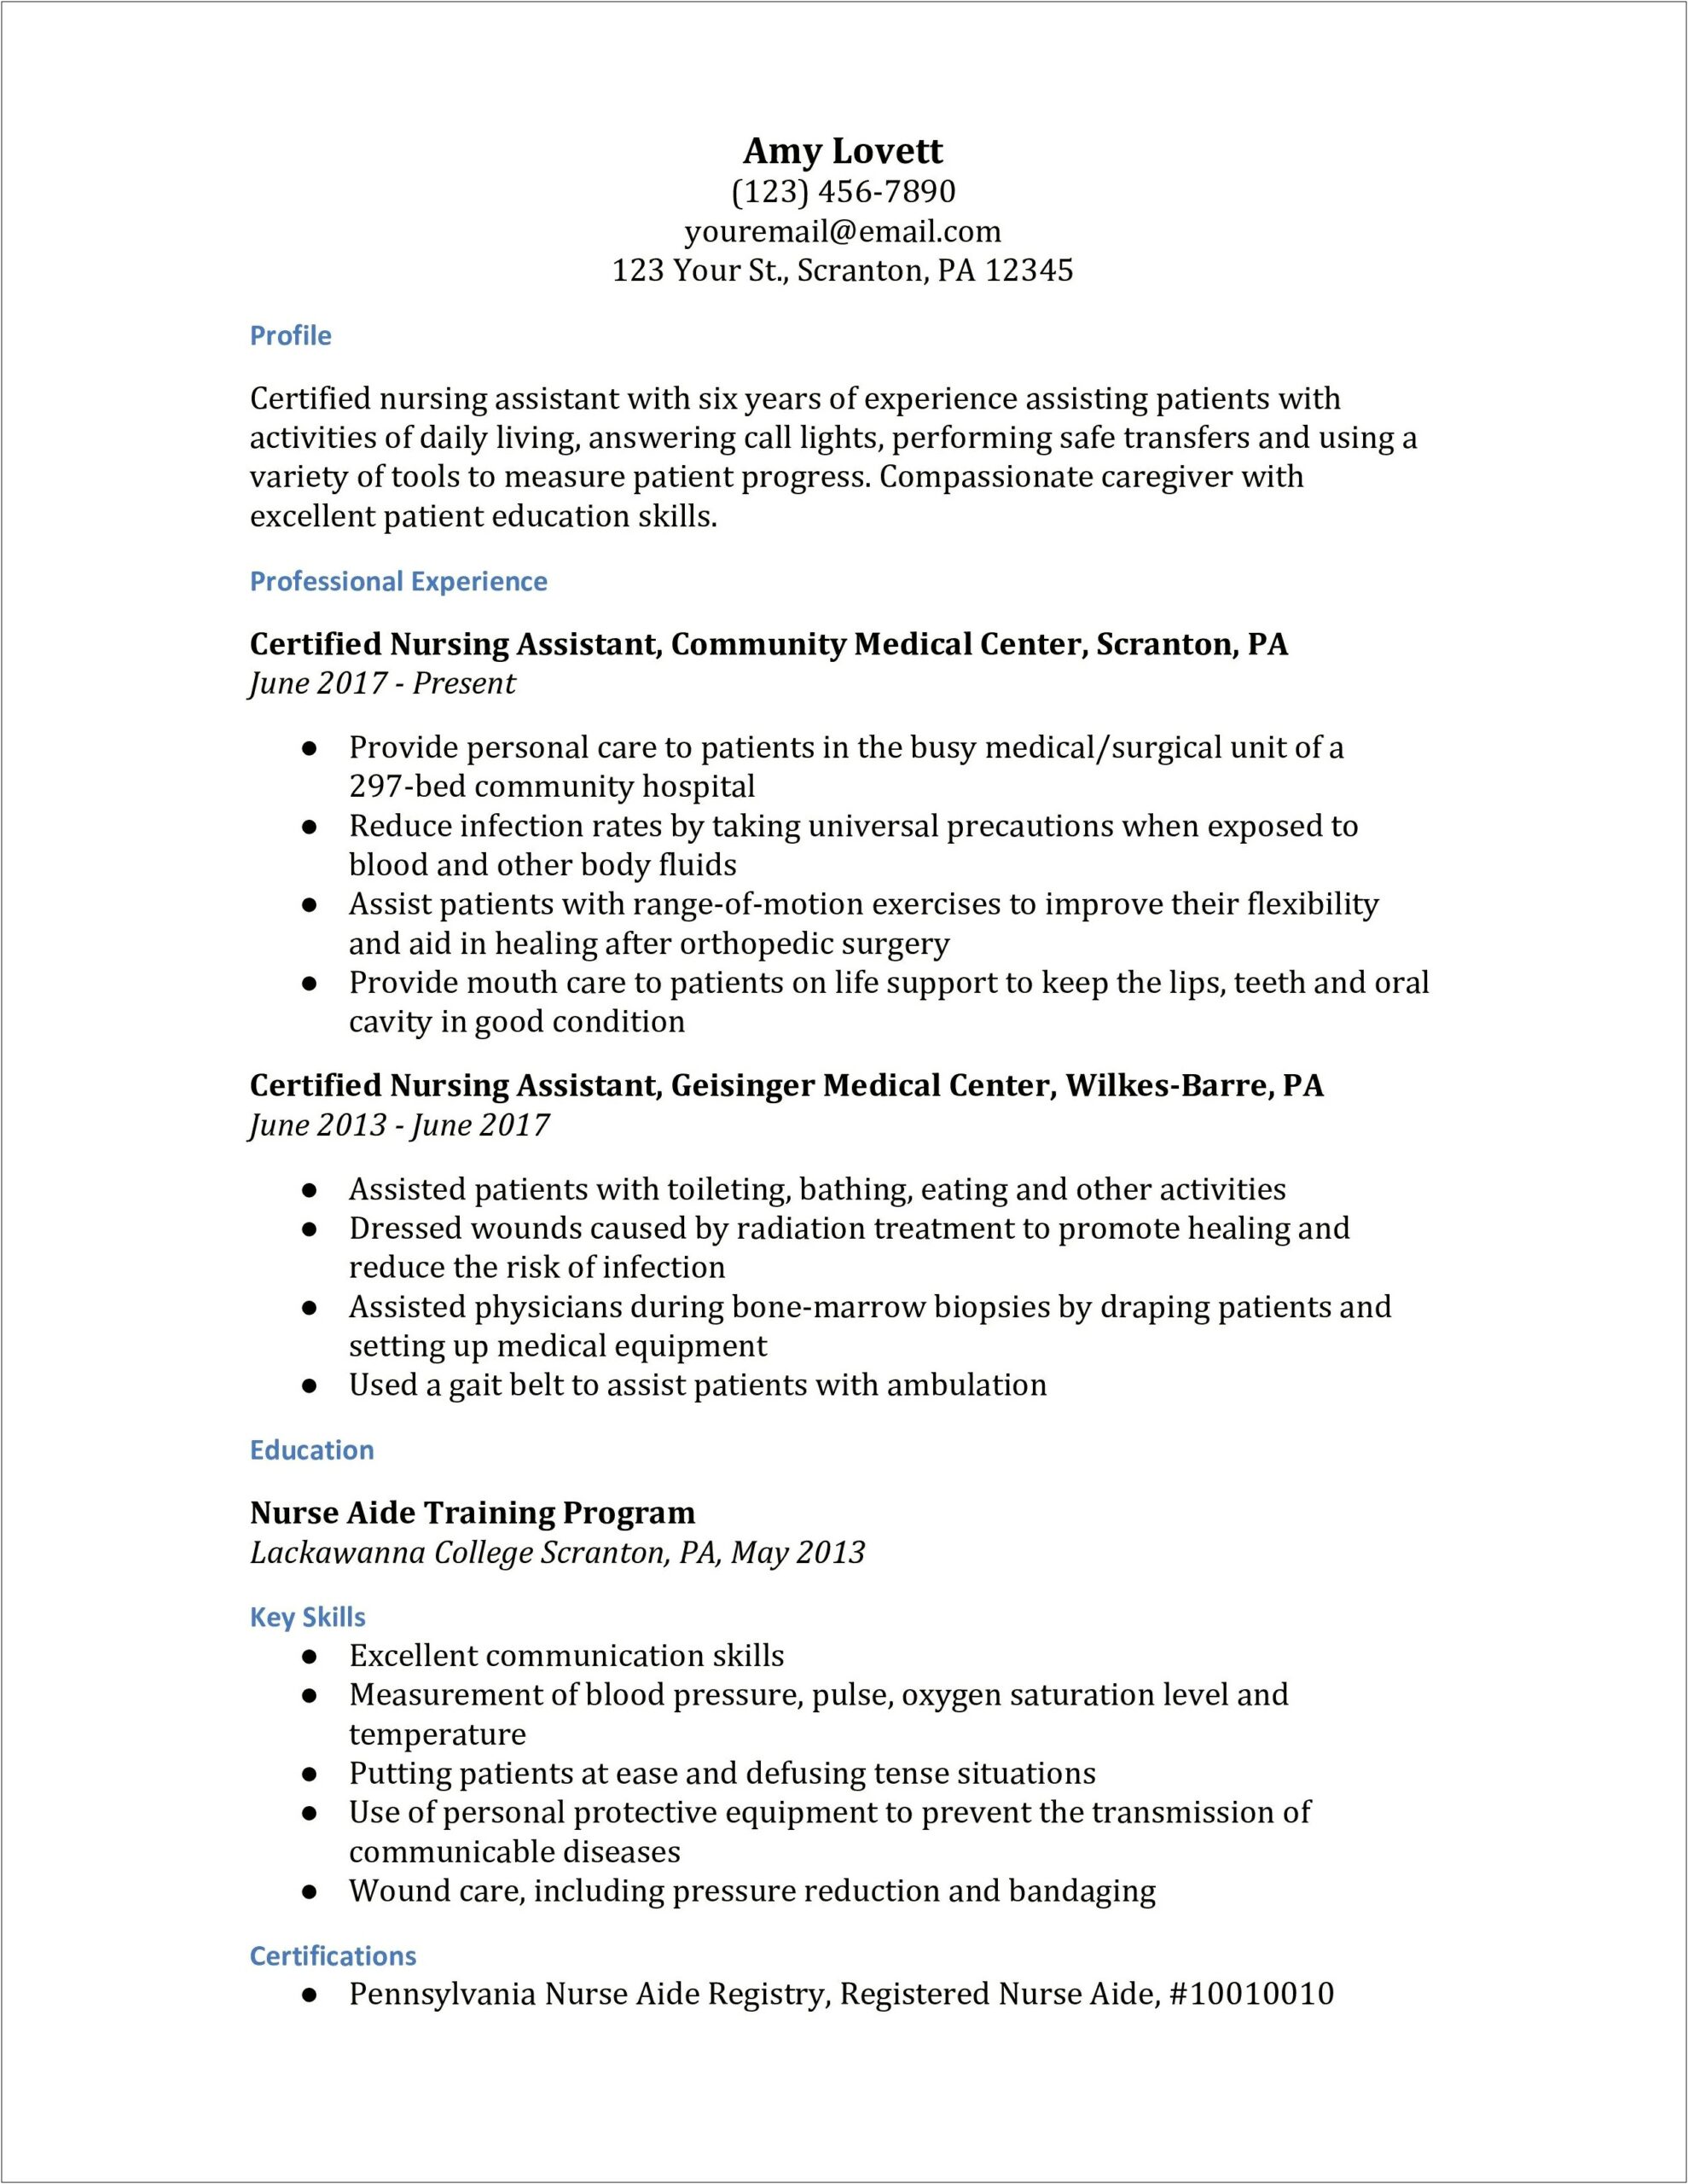 Putting Years Of Experience On Resume